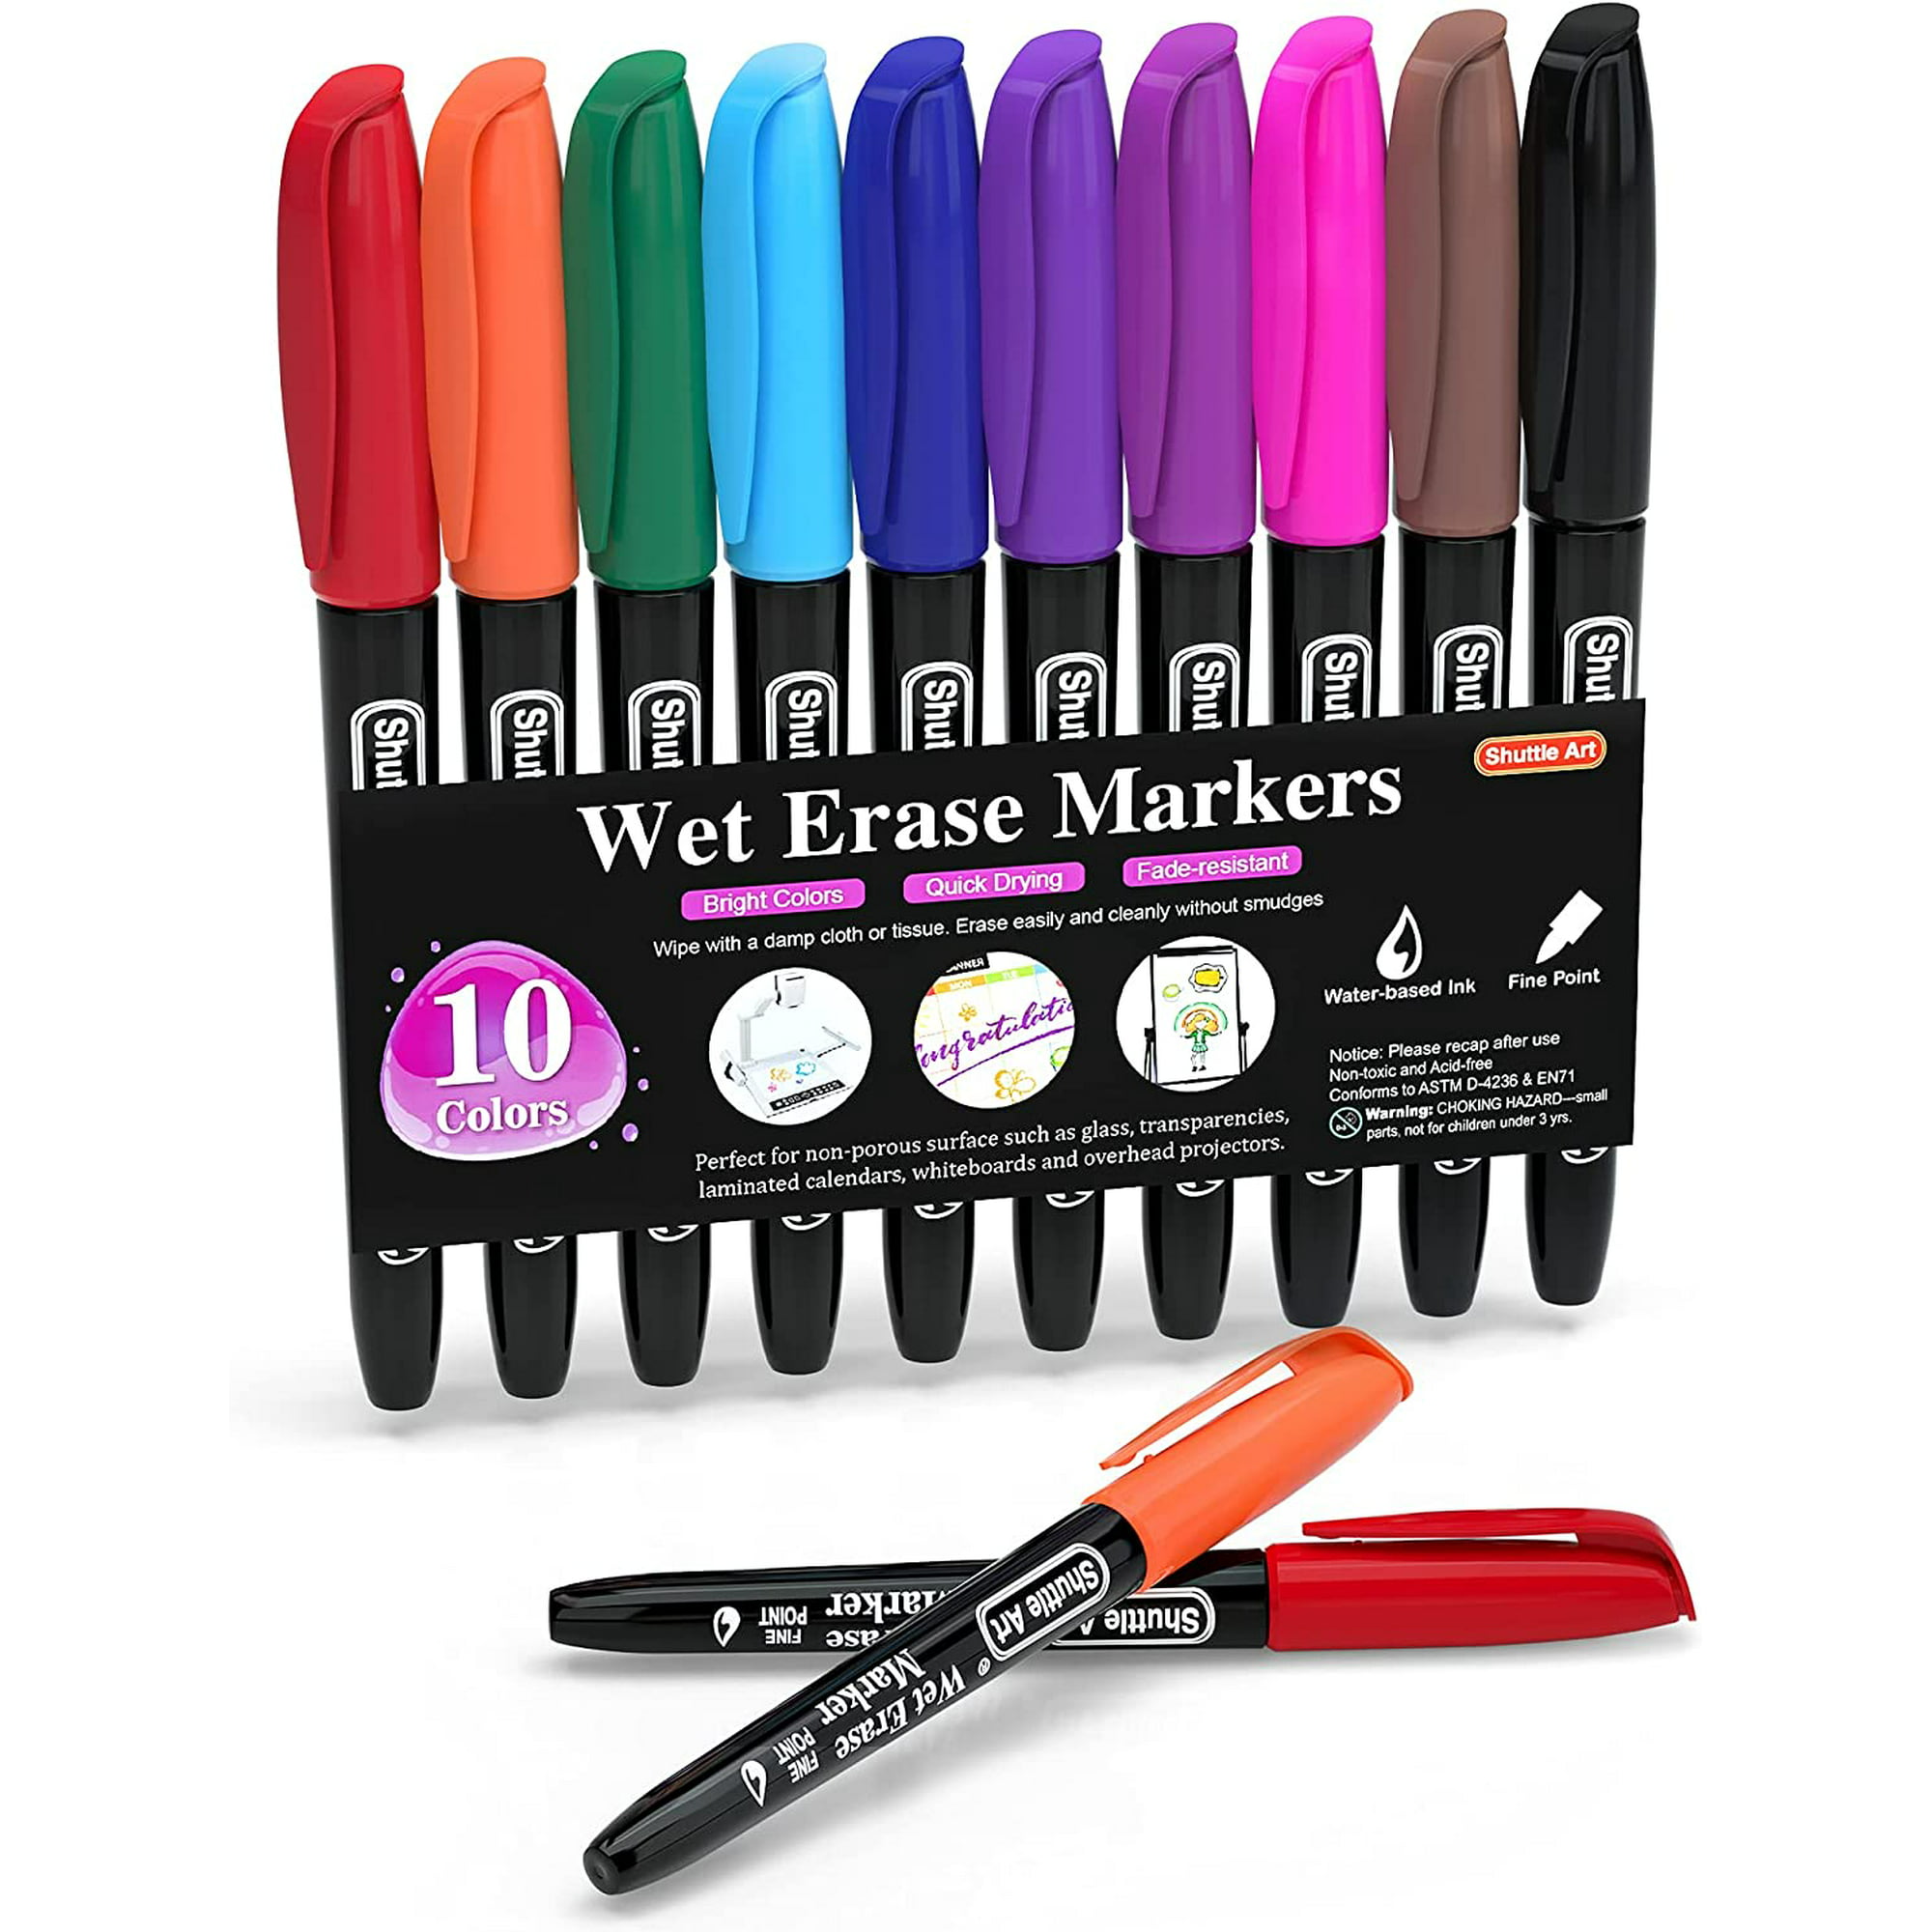 Værdiløs godt træt af Wet Erase Markers, Shuttle Art 12 Colors 1mm Fine Tip Overhead Projectors  Transparency Smudge-Free Markers, Works for Laminated Calendars Whiteboard  Schedule Glass, Wipe with Water | Walmart Canada